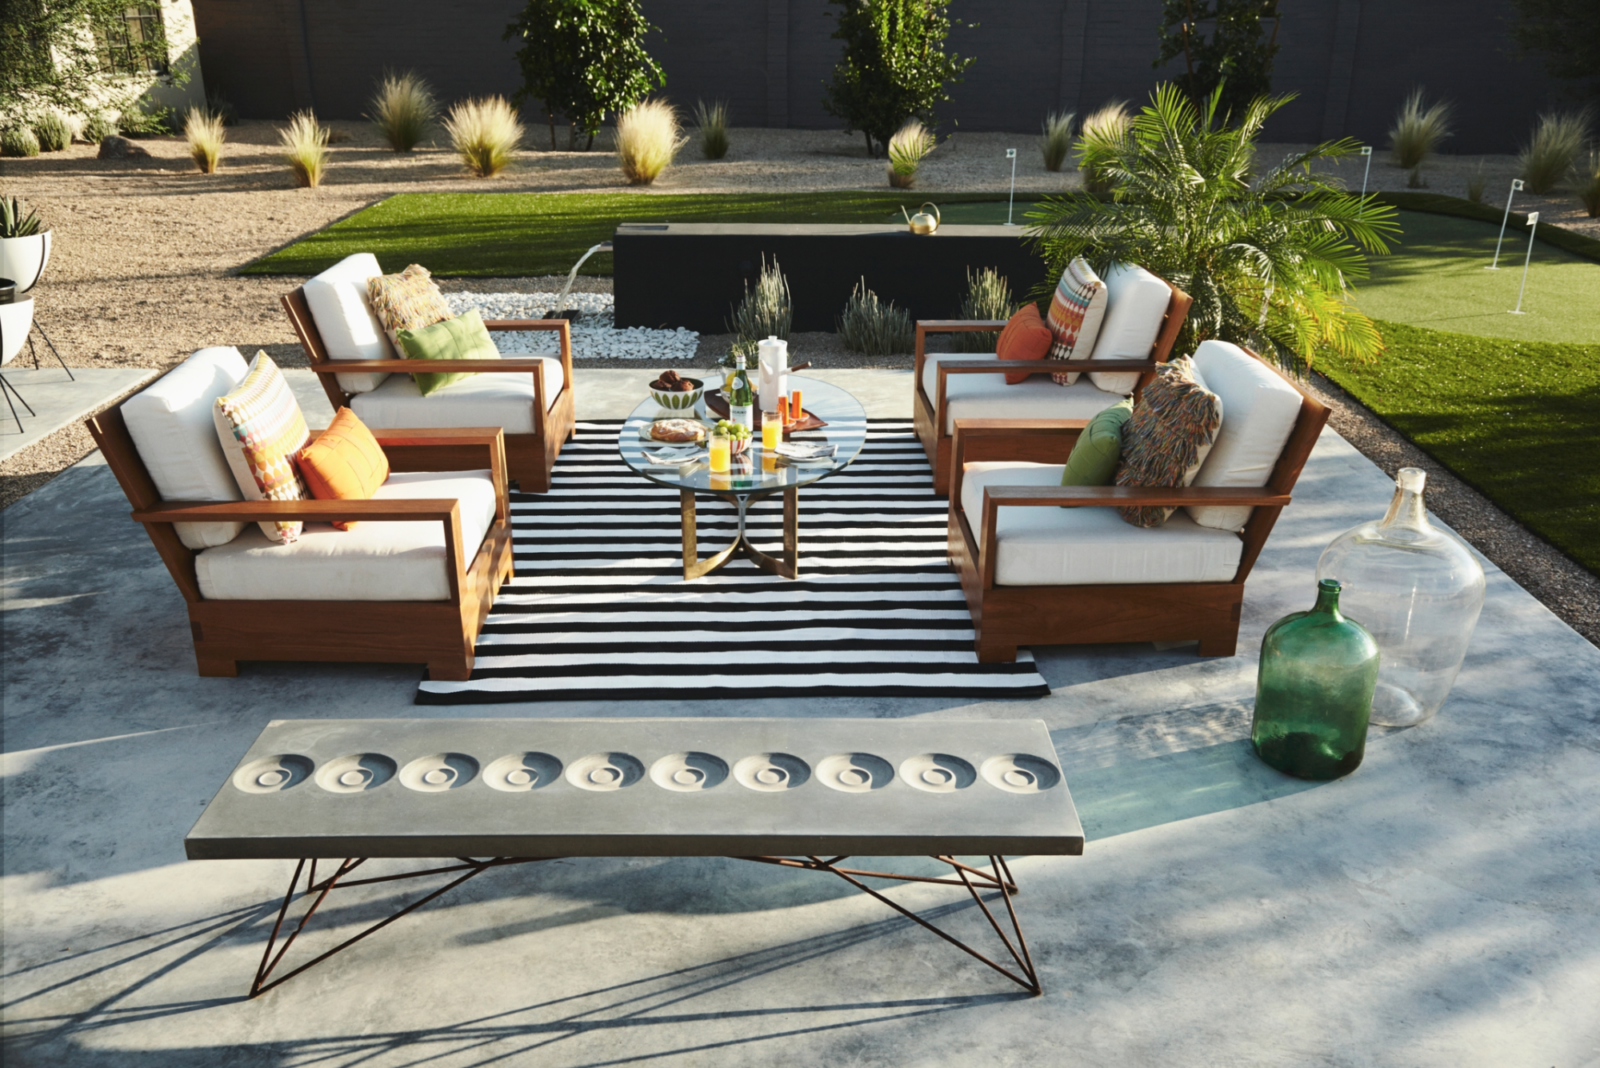 Outdoor Entertaining: Labor Day Weekend Edition